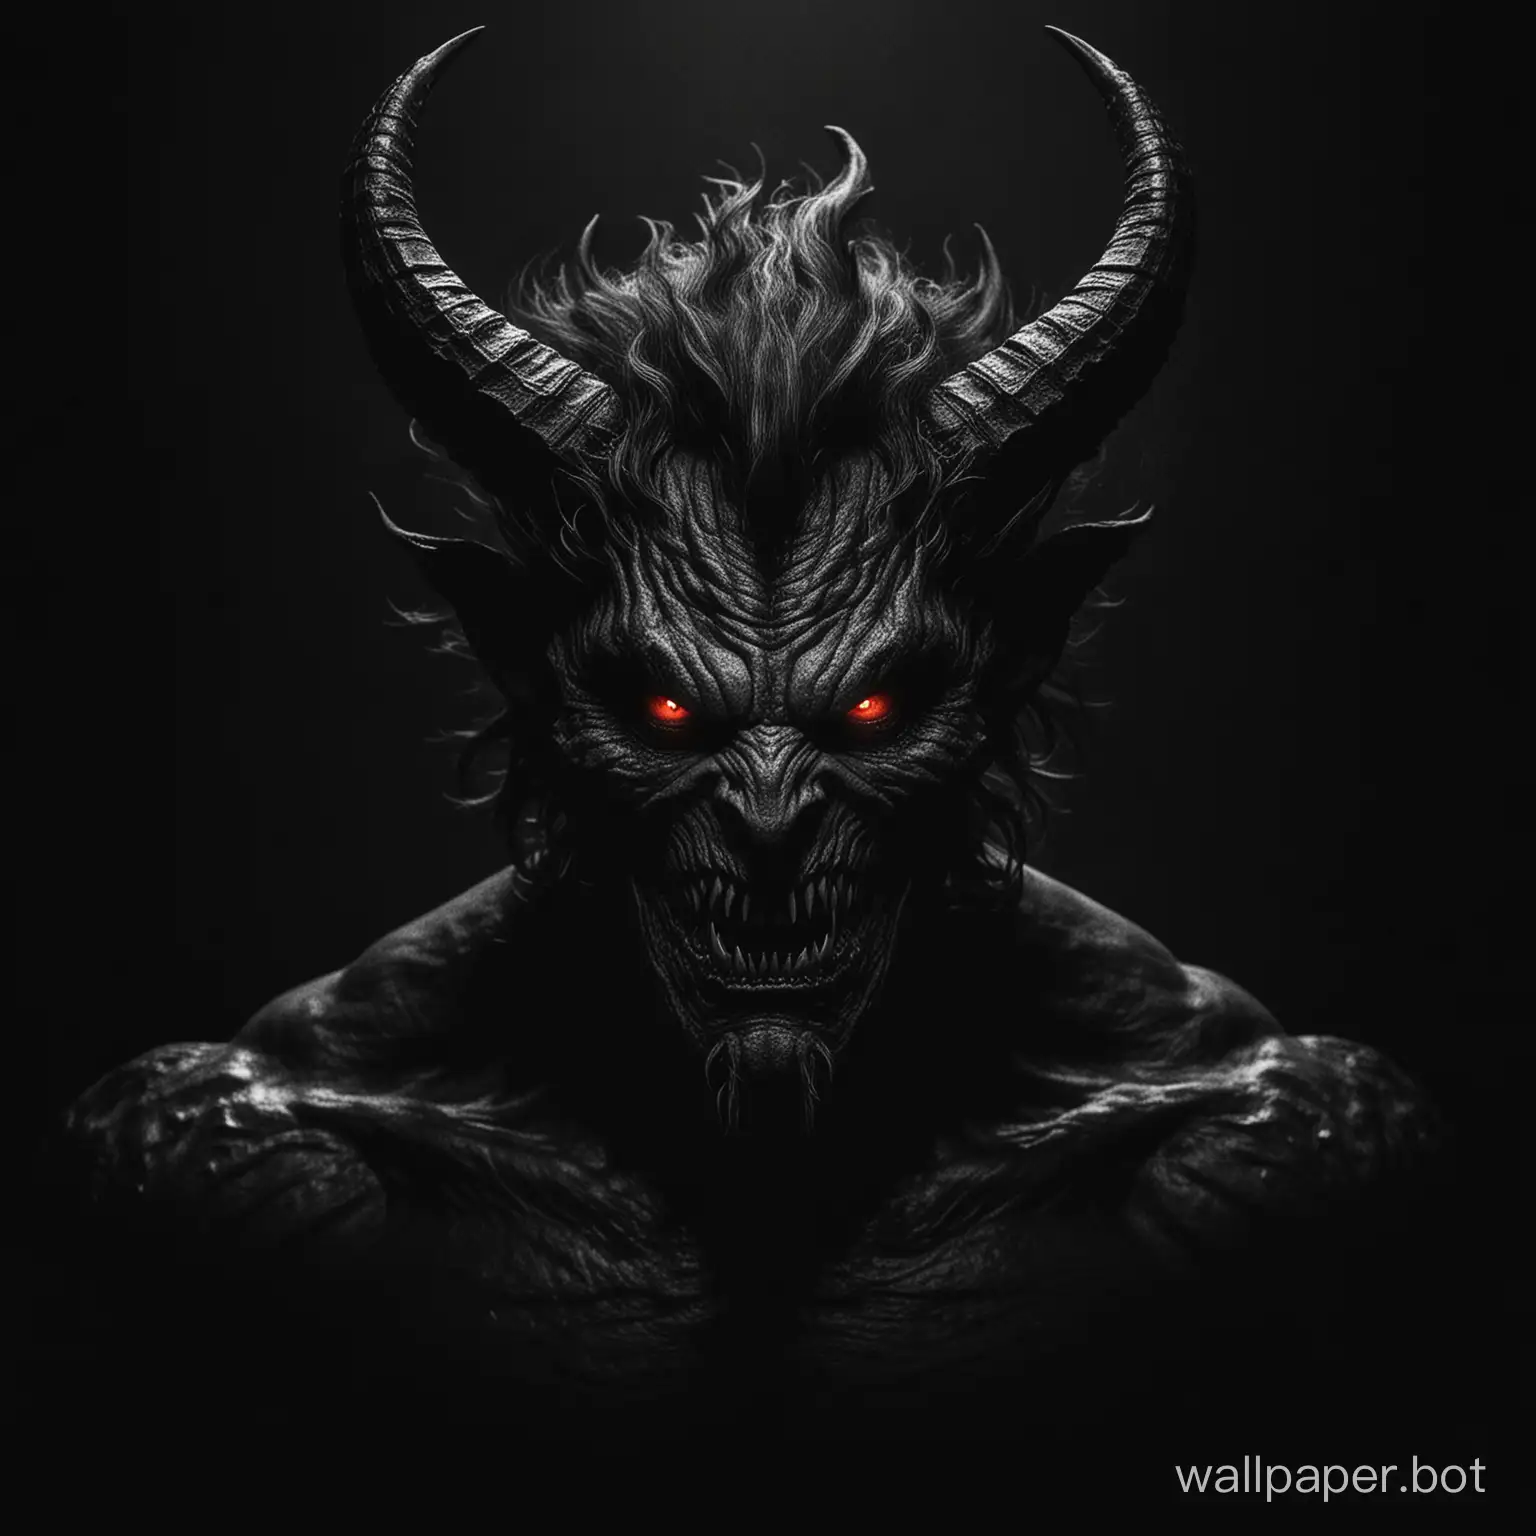 Sinister-Demon-Silhouetted-Against-Black-Background